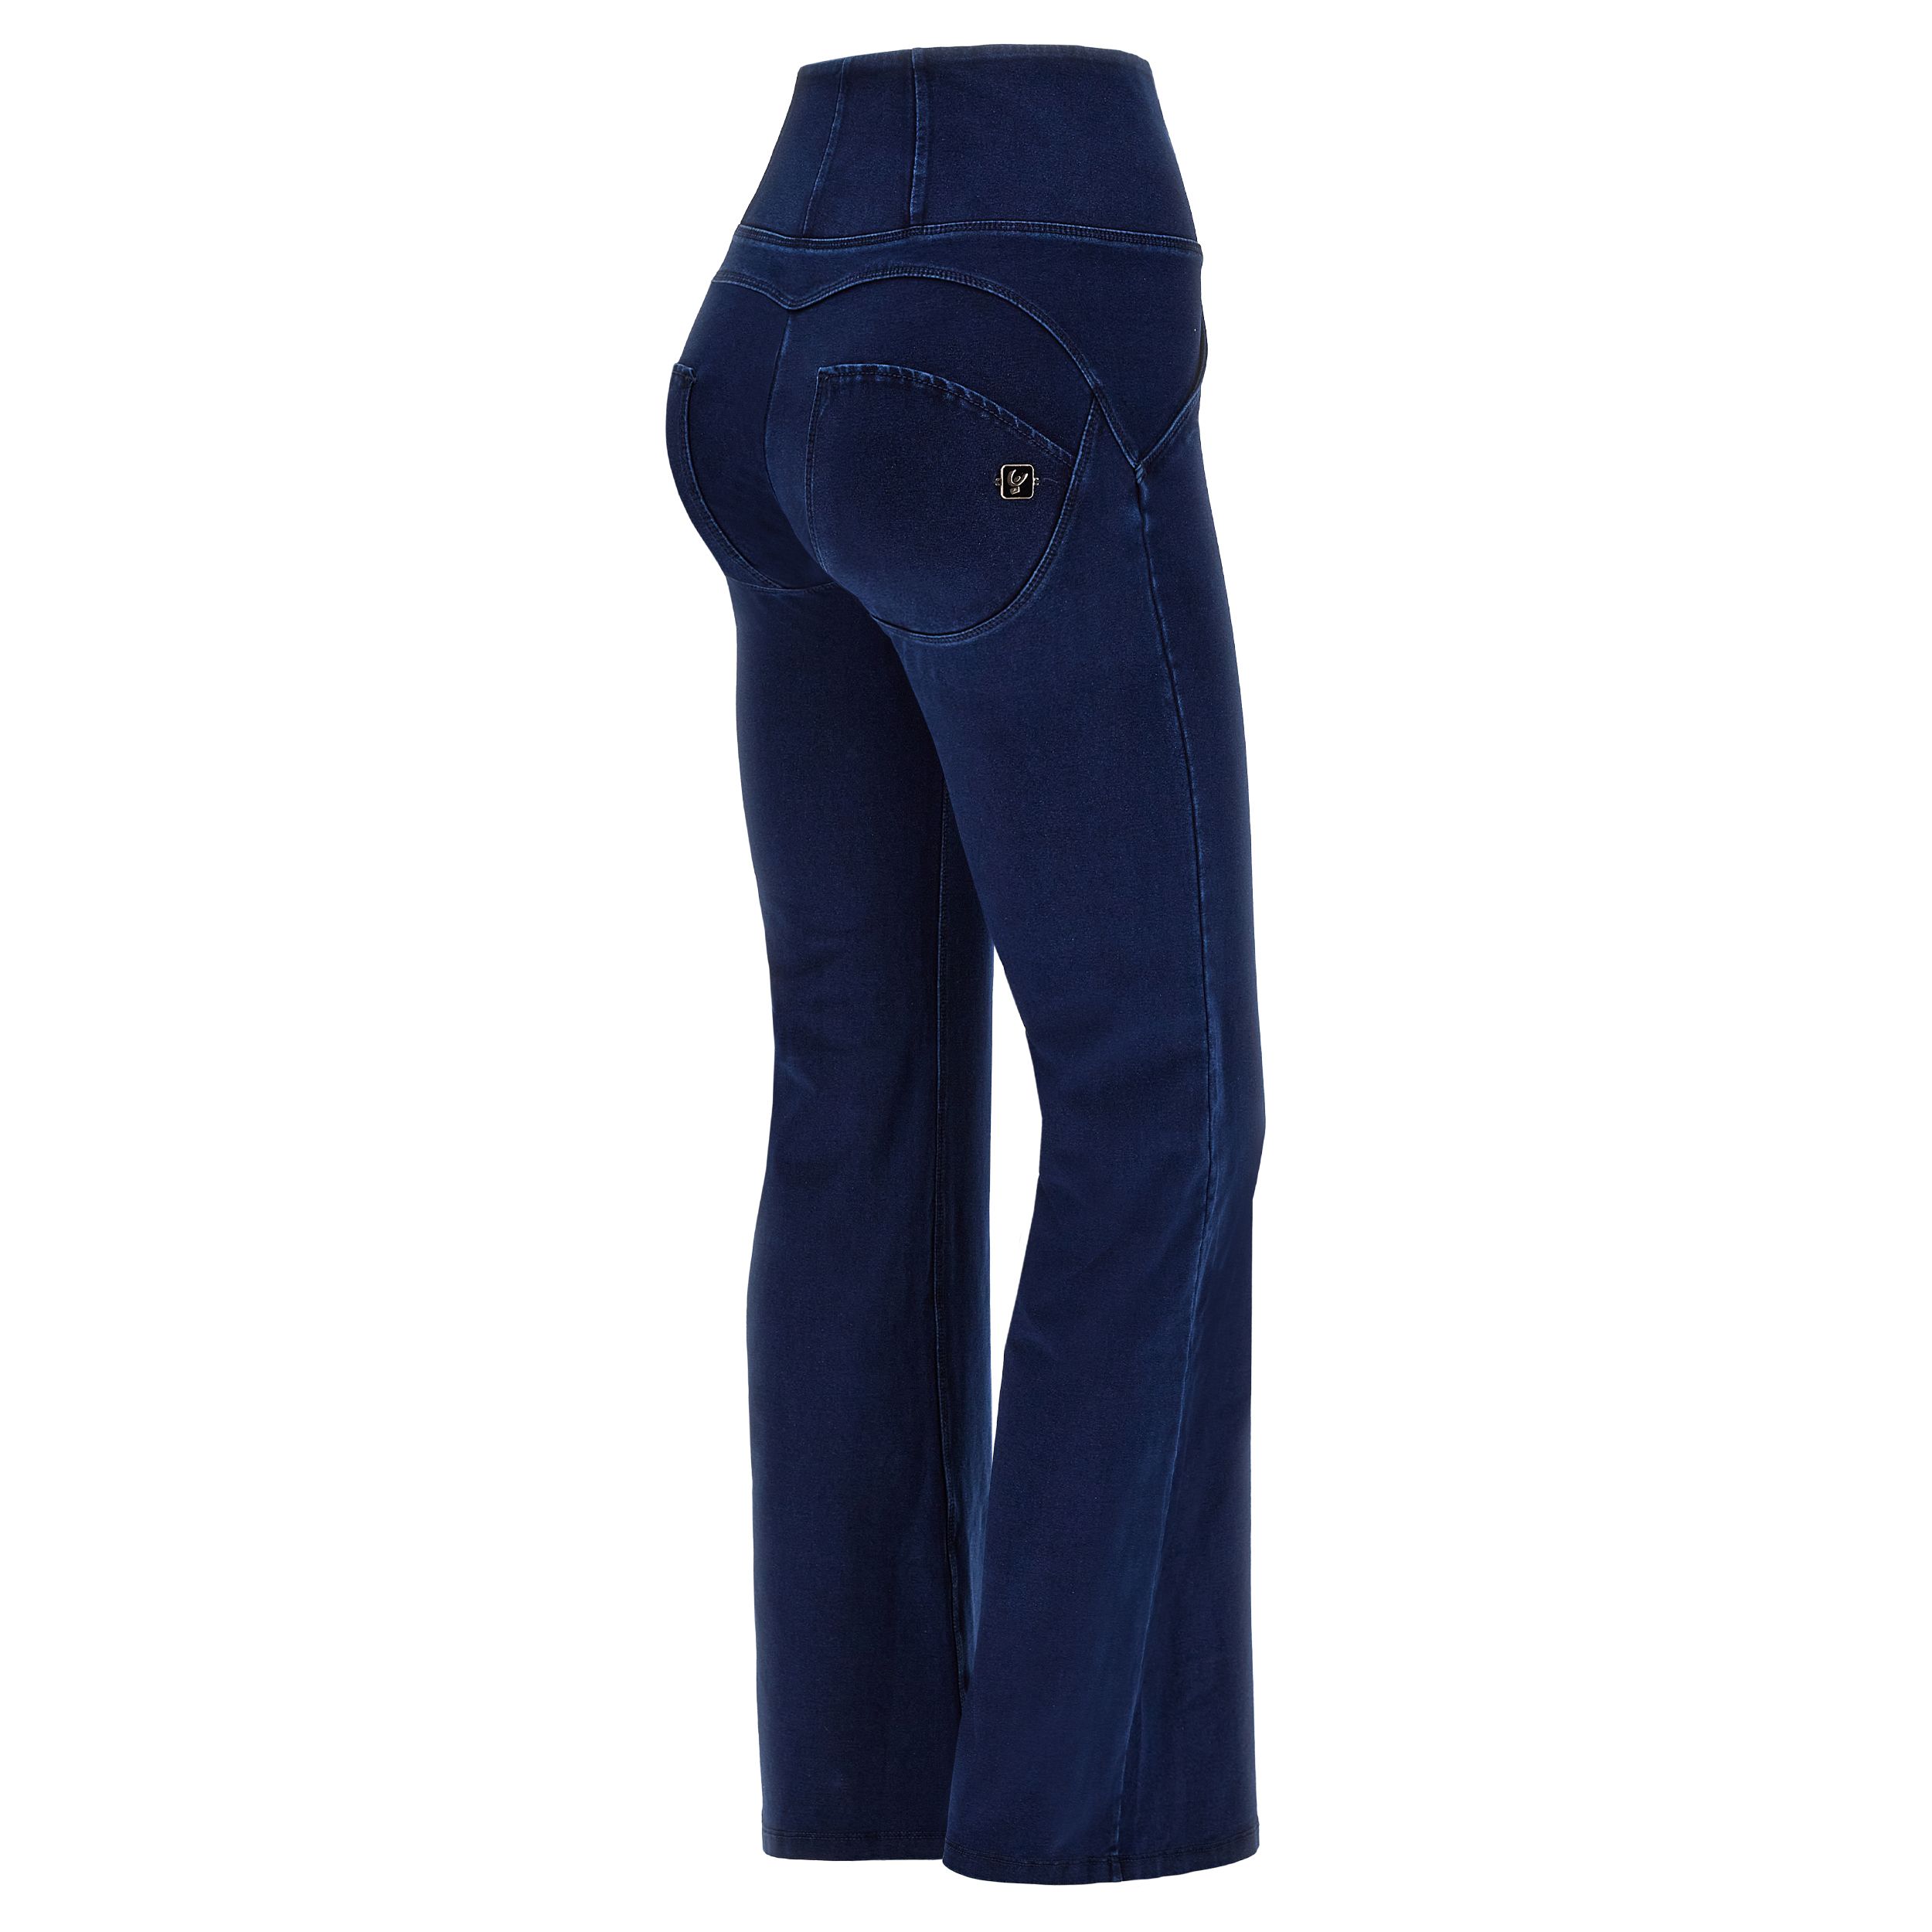 Super-flare WR.UP® shaping jeggings with a high waist